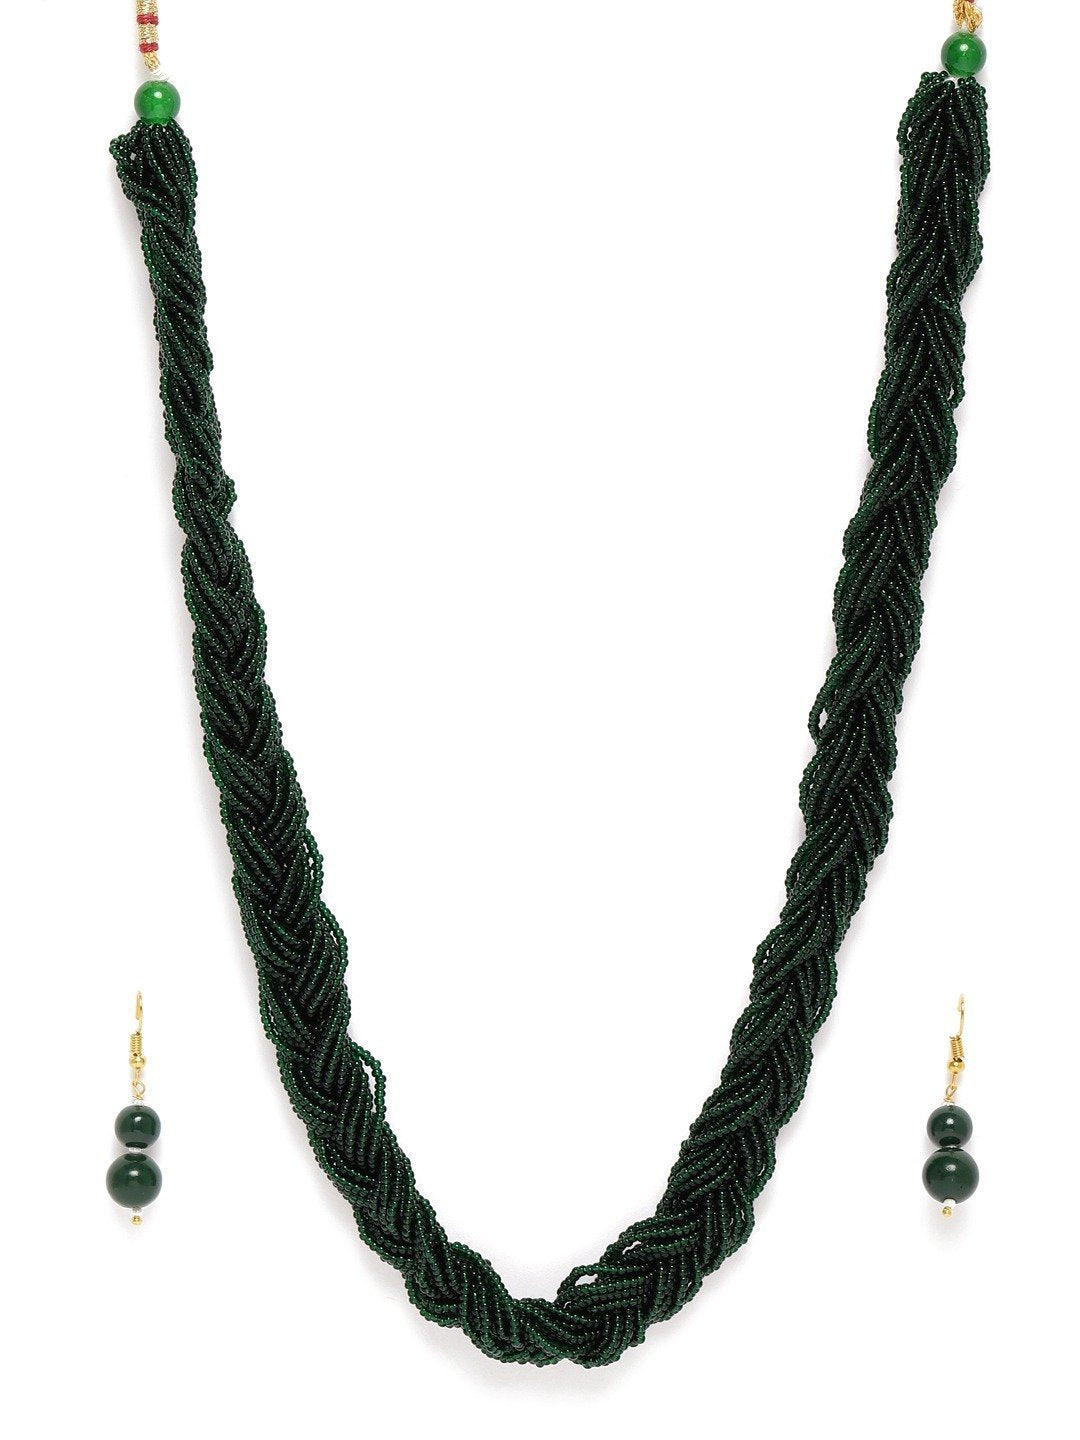 Women's Designer Emerald Twisted Beads Long Necklace Set With Earrings - i jewels